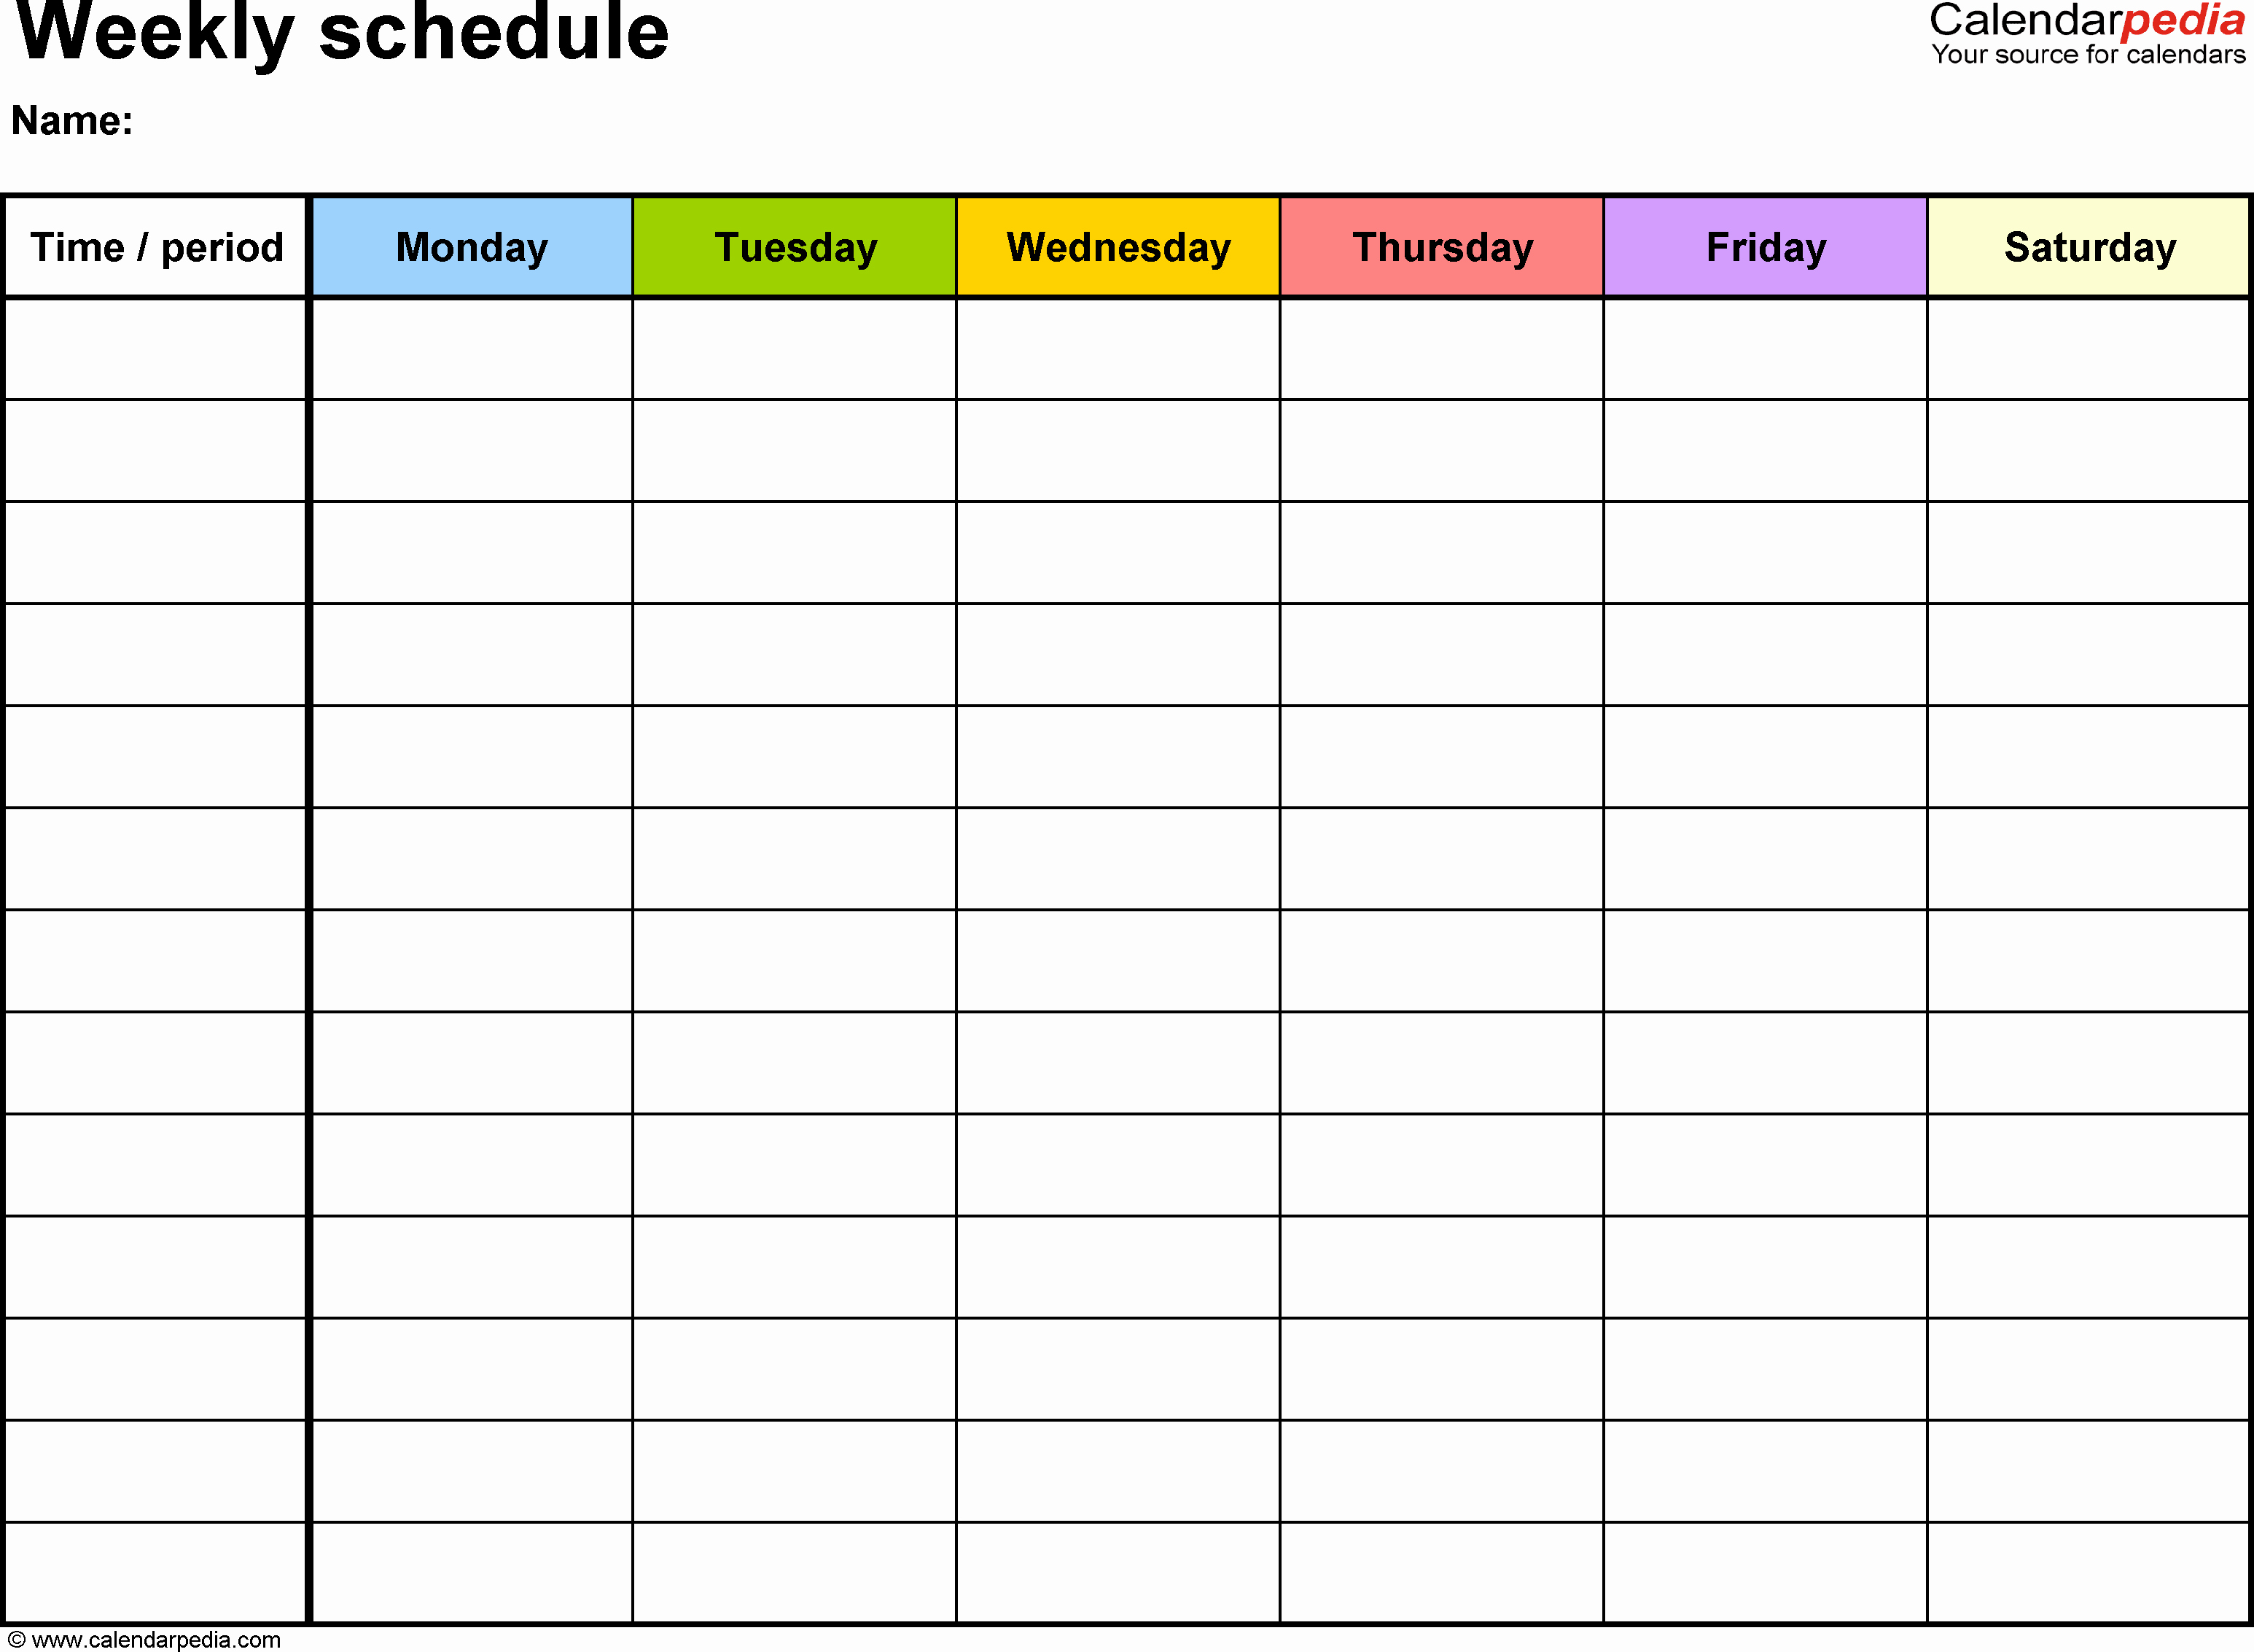 Free Weekly Schedule Templates for Word 18 Templates